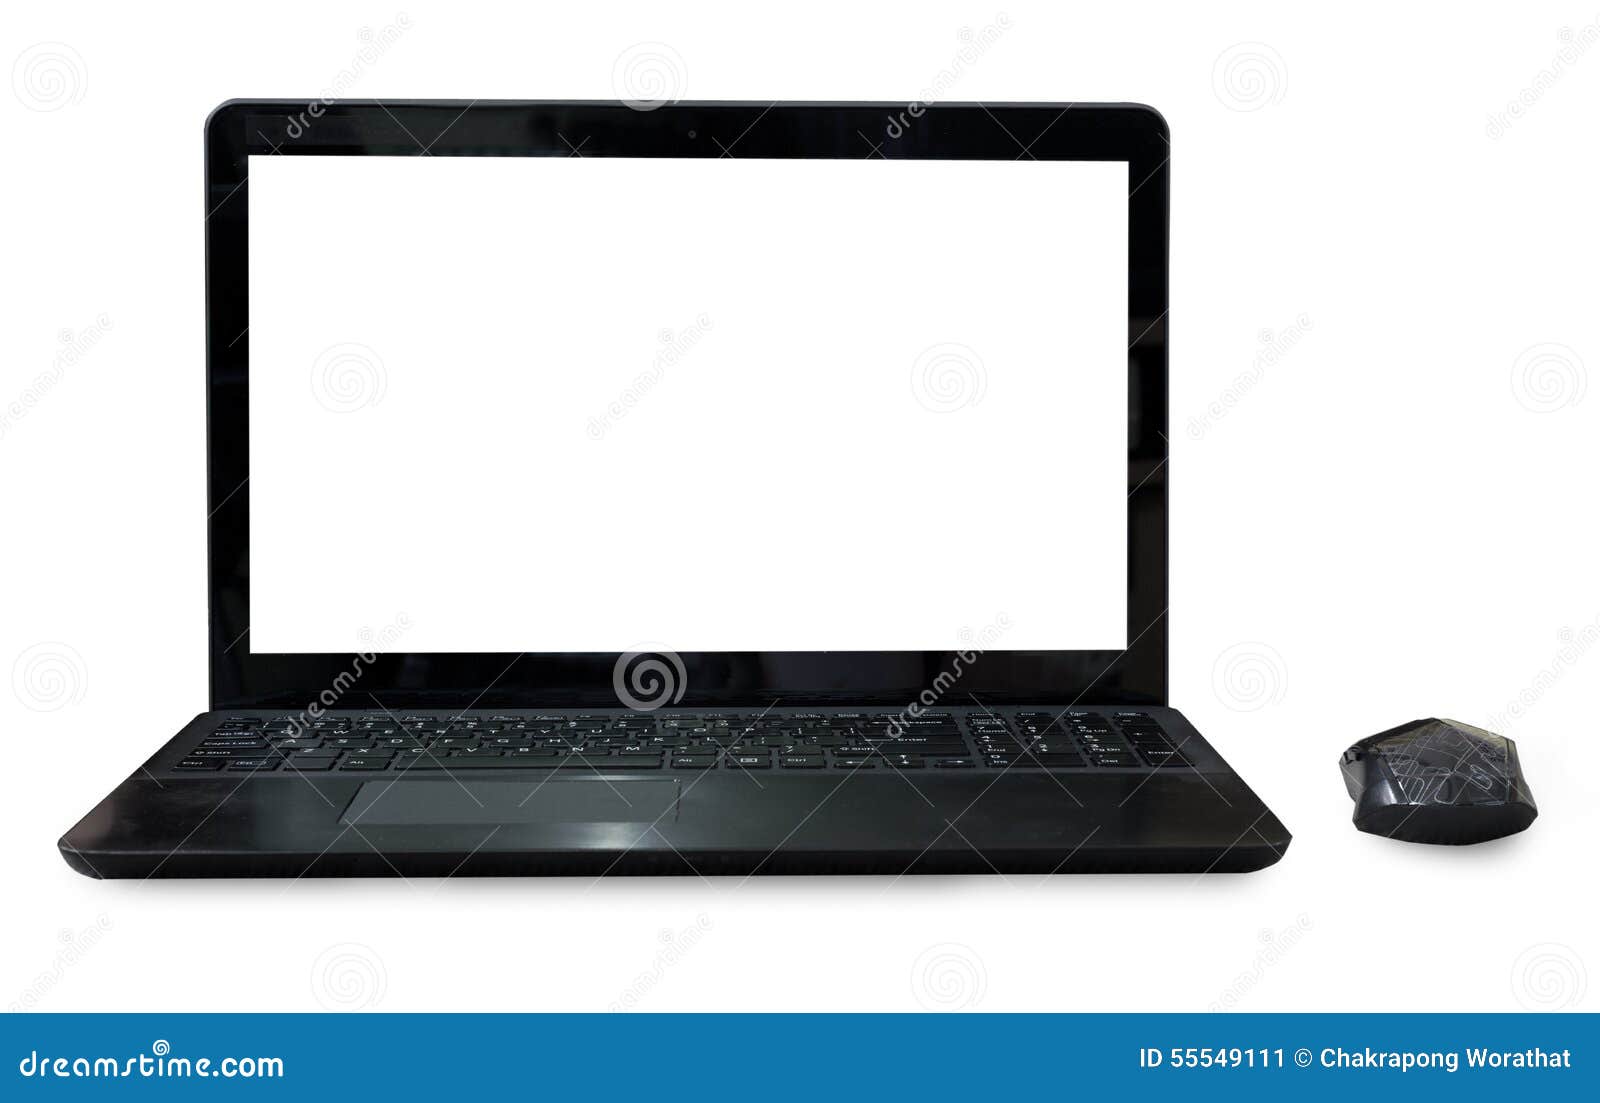 black labtop with mouse bluetooth  white background.